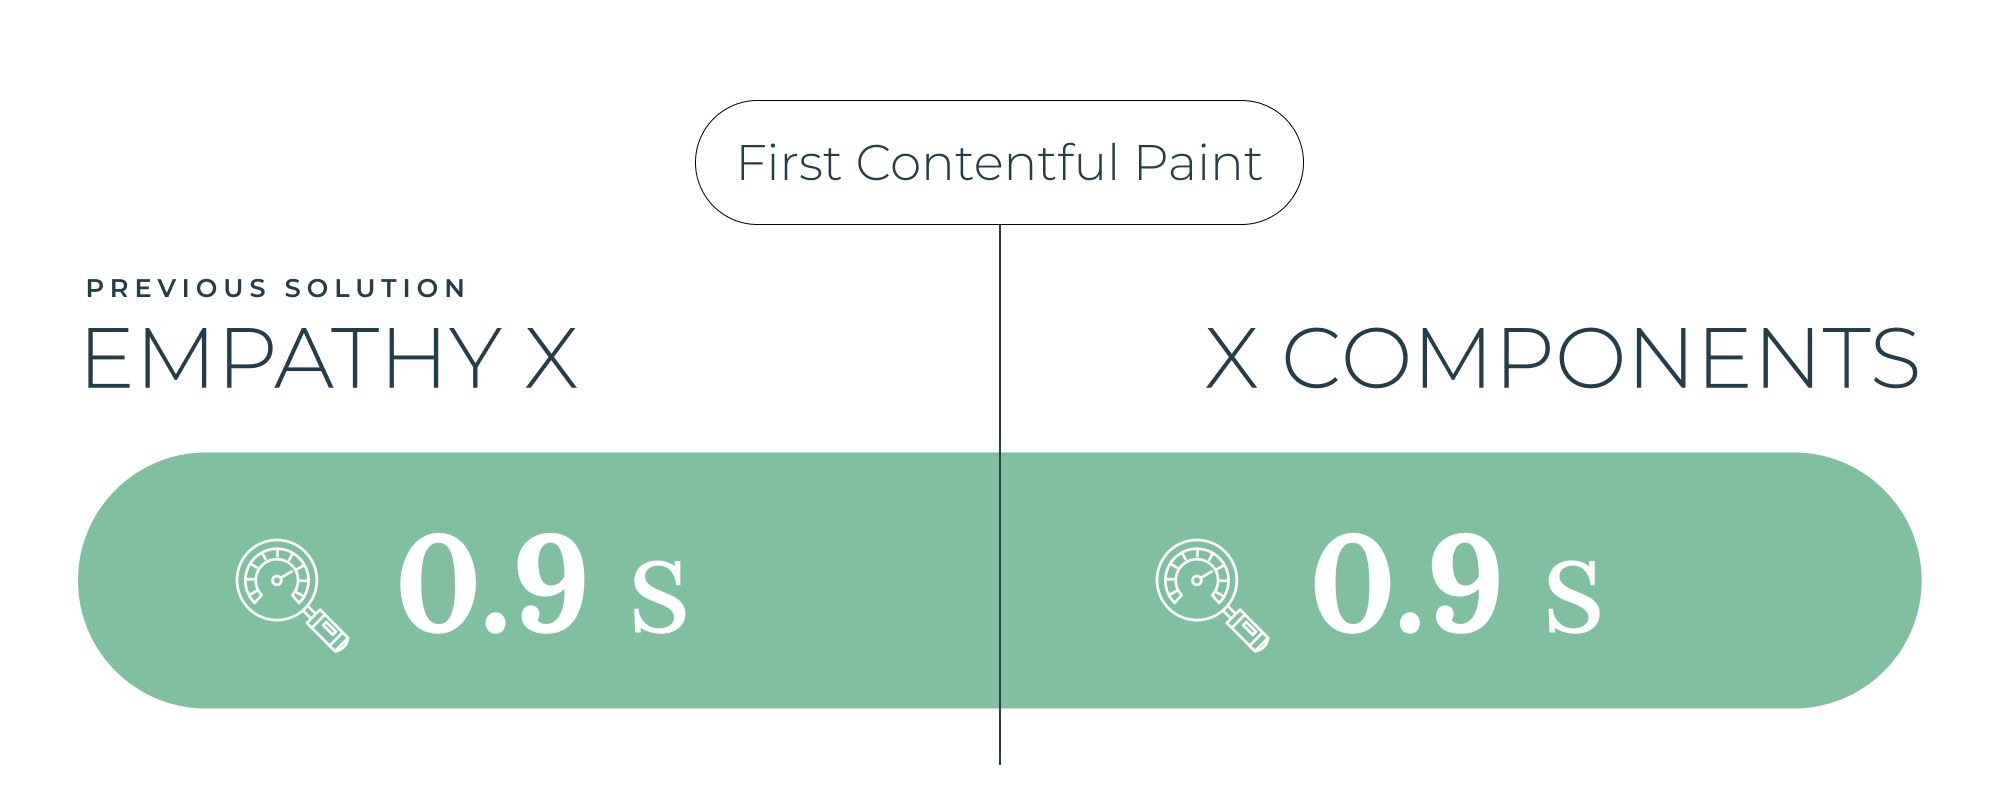 First Contentful Paint